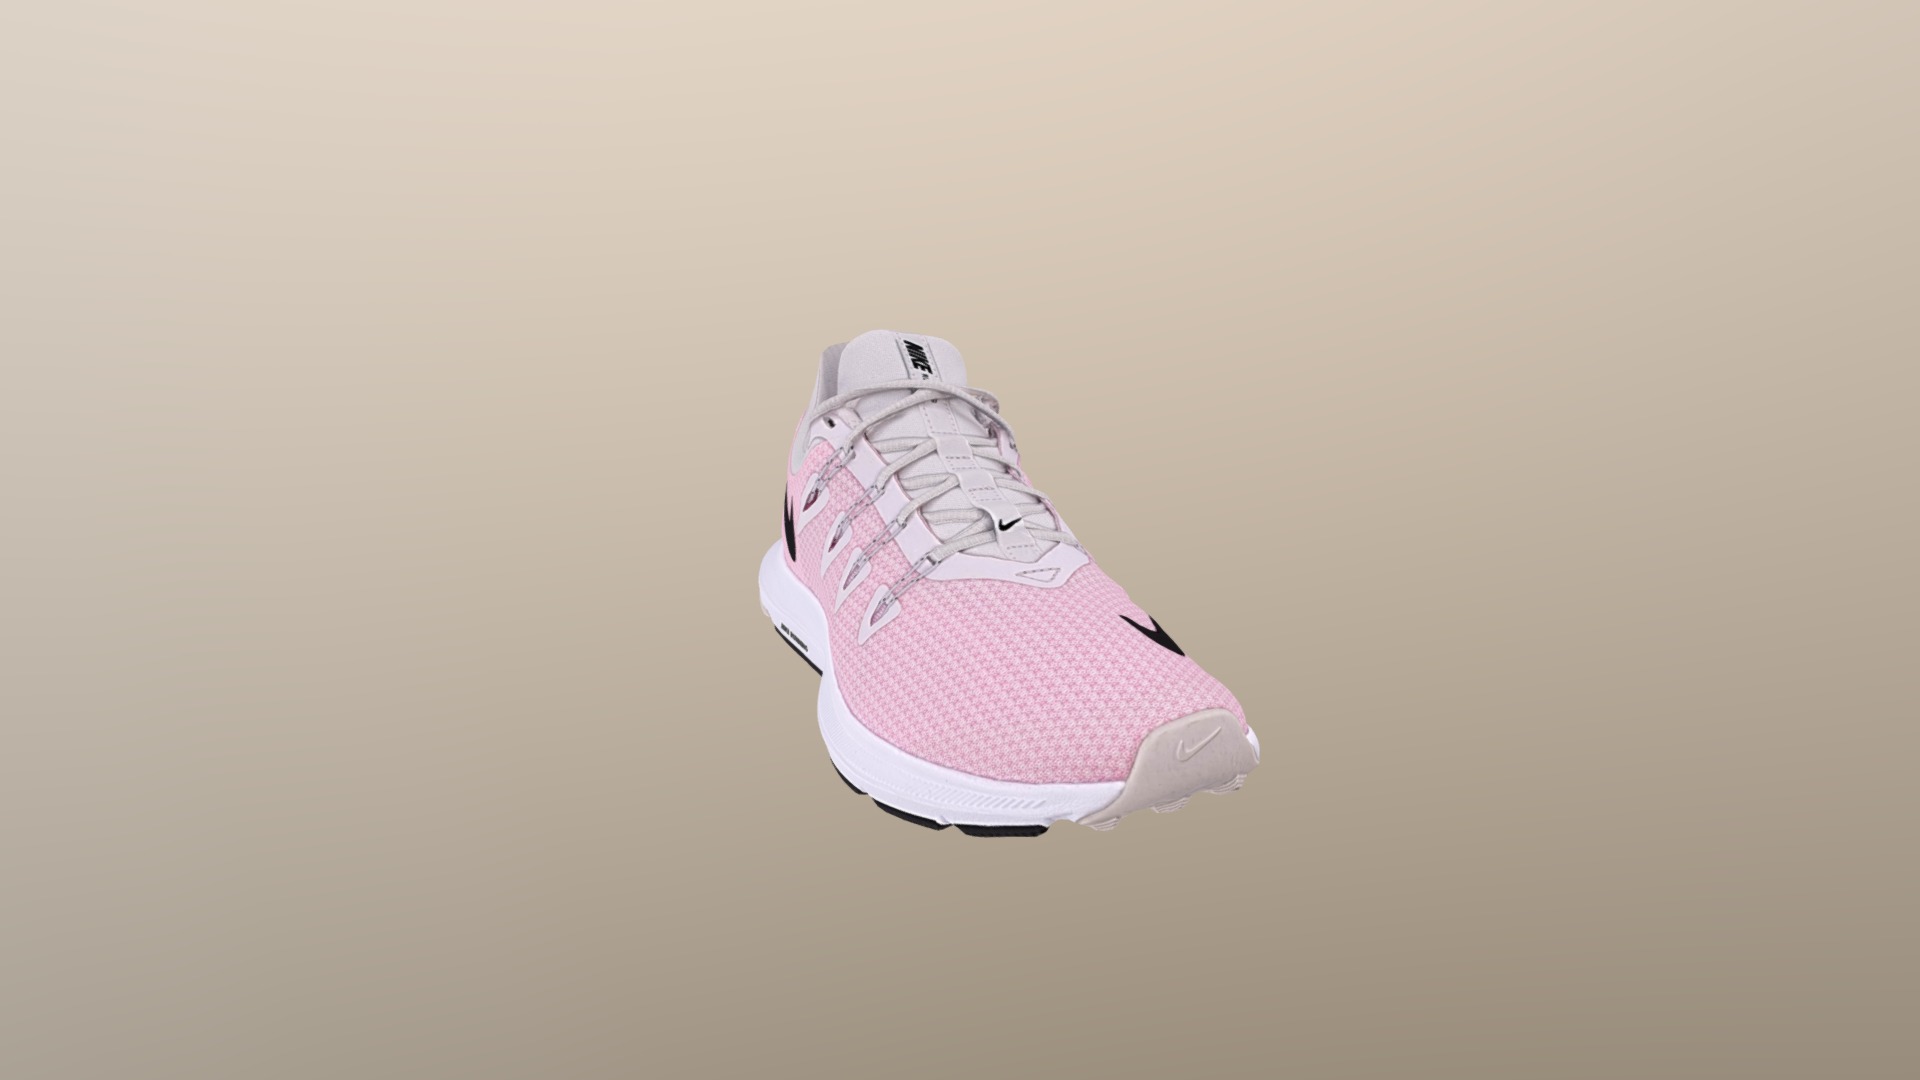 3D model NikeRunningPink - This is a 3D model of the NikeRunningPink. The 3D model is about a pair of white shoes.